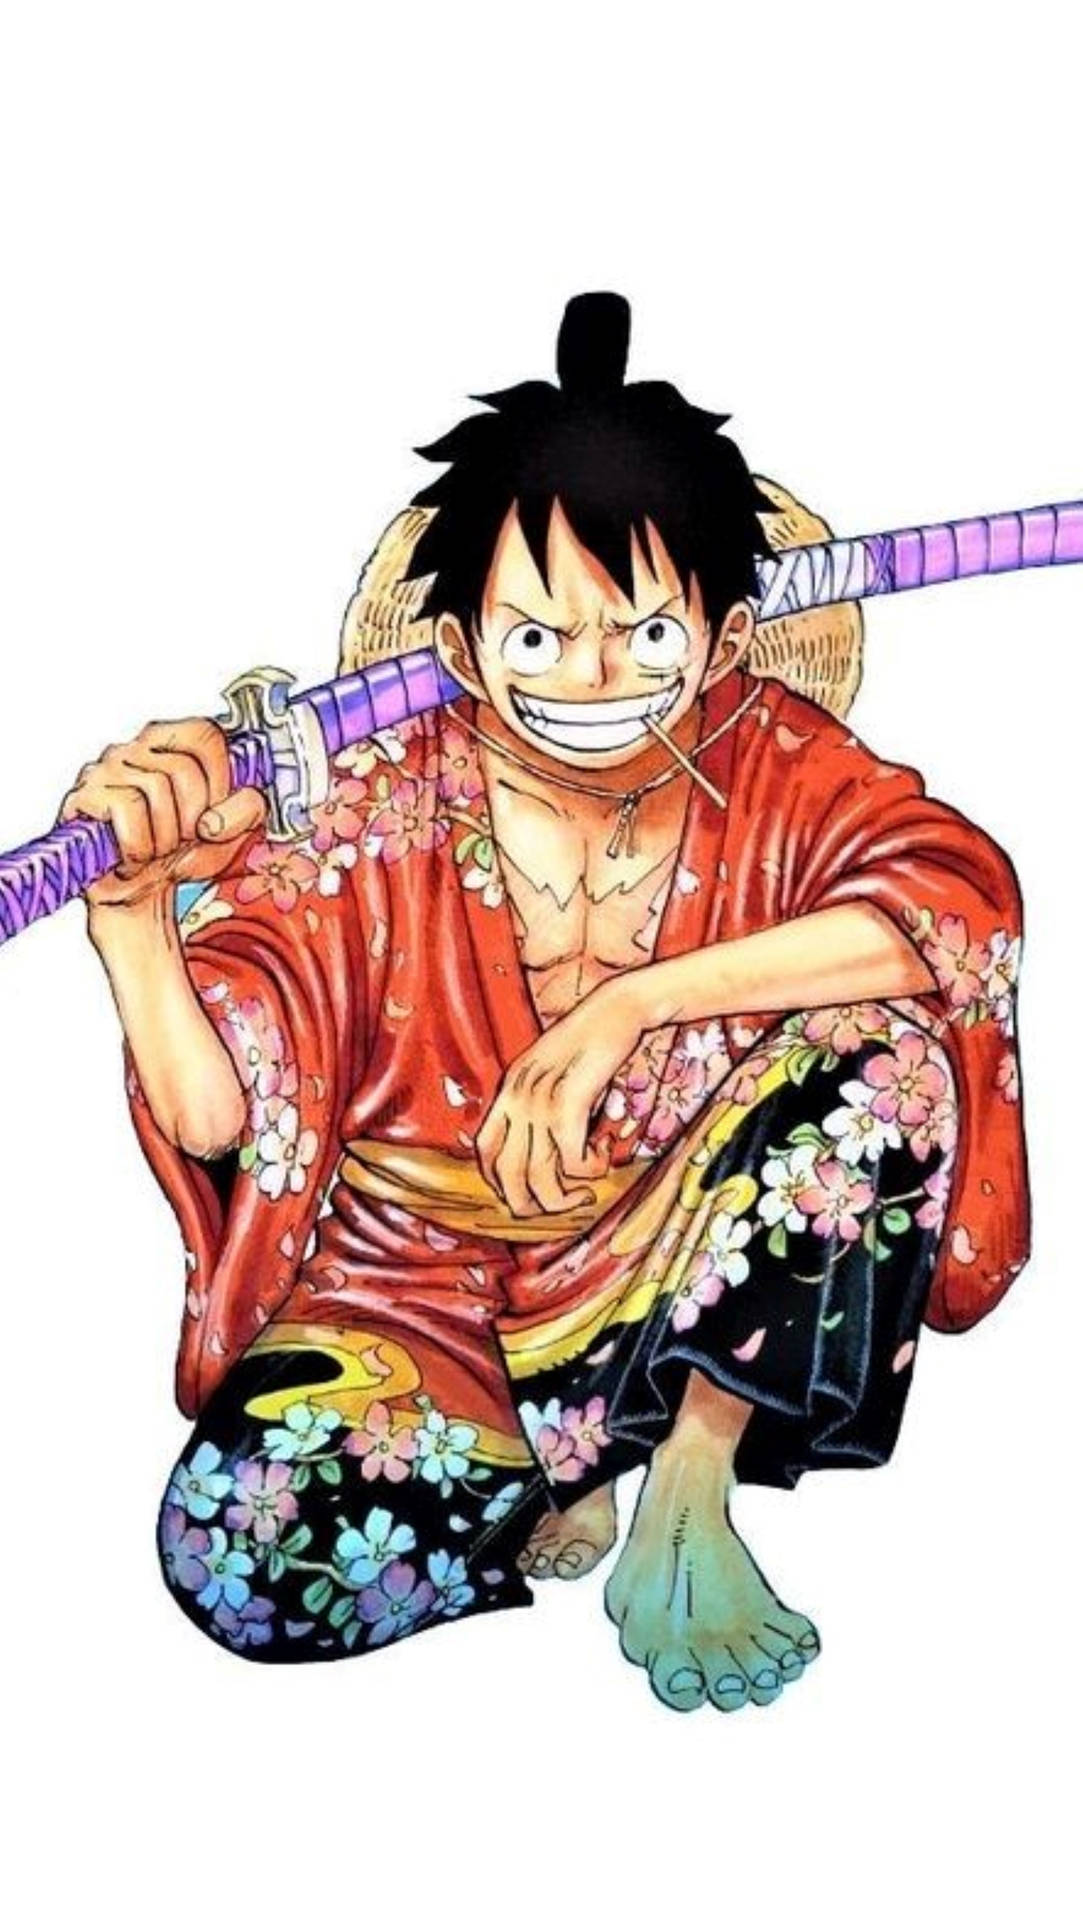 Monkey D Luffy In Zoro Outfit